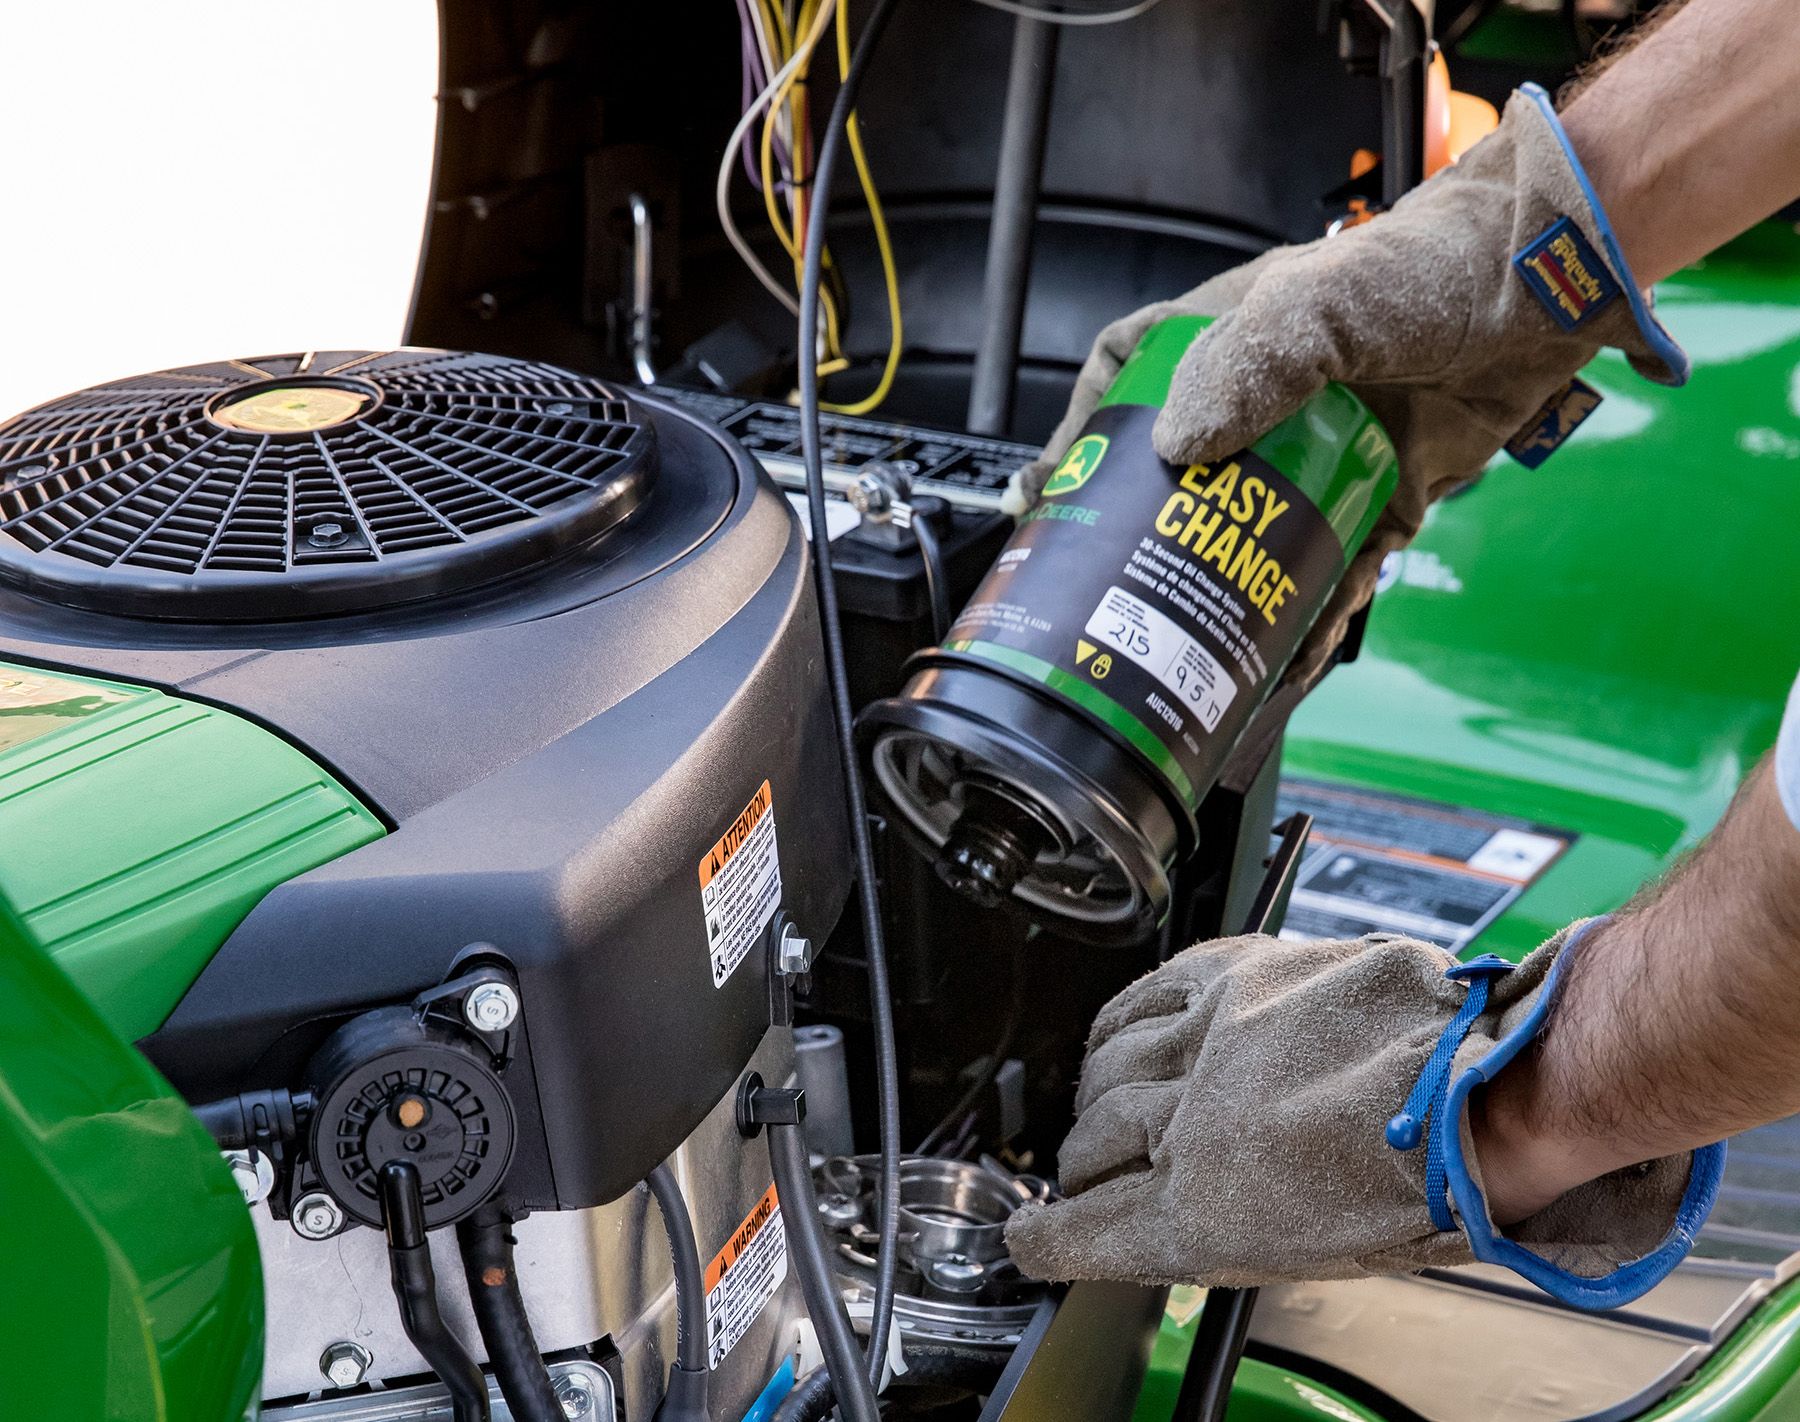 Troubleshooting Issues with John Deere's 30-Second Oil Change System